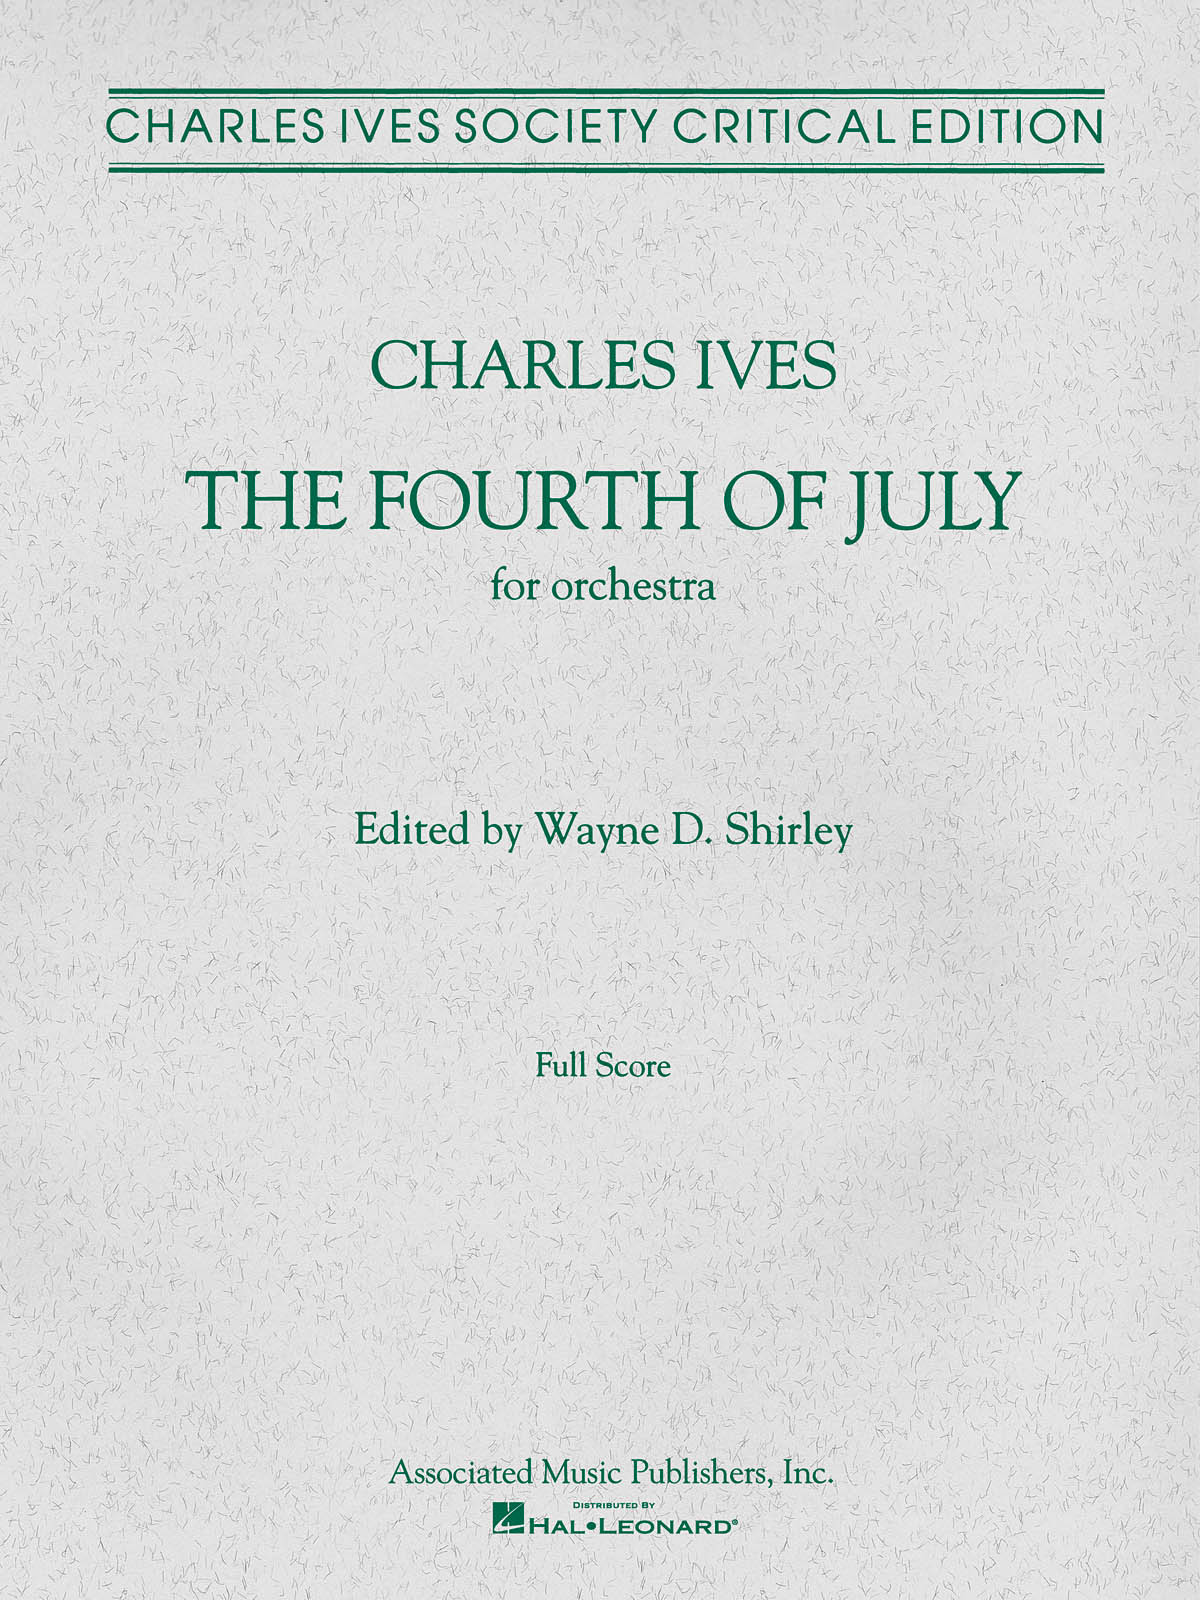 Charles E. Ives: The Fourth of July (1911-13): Orchestra: Score